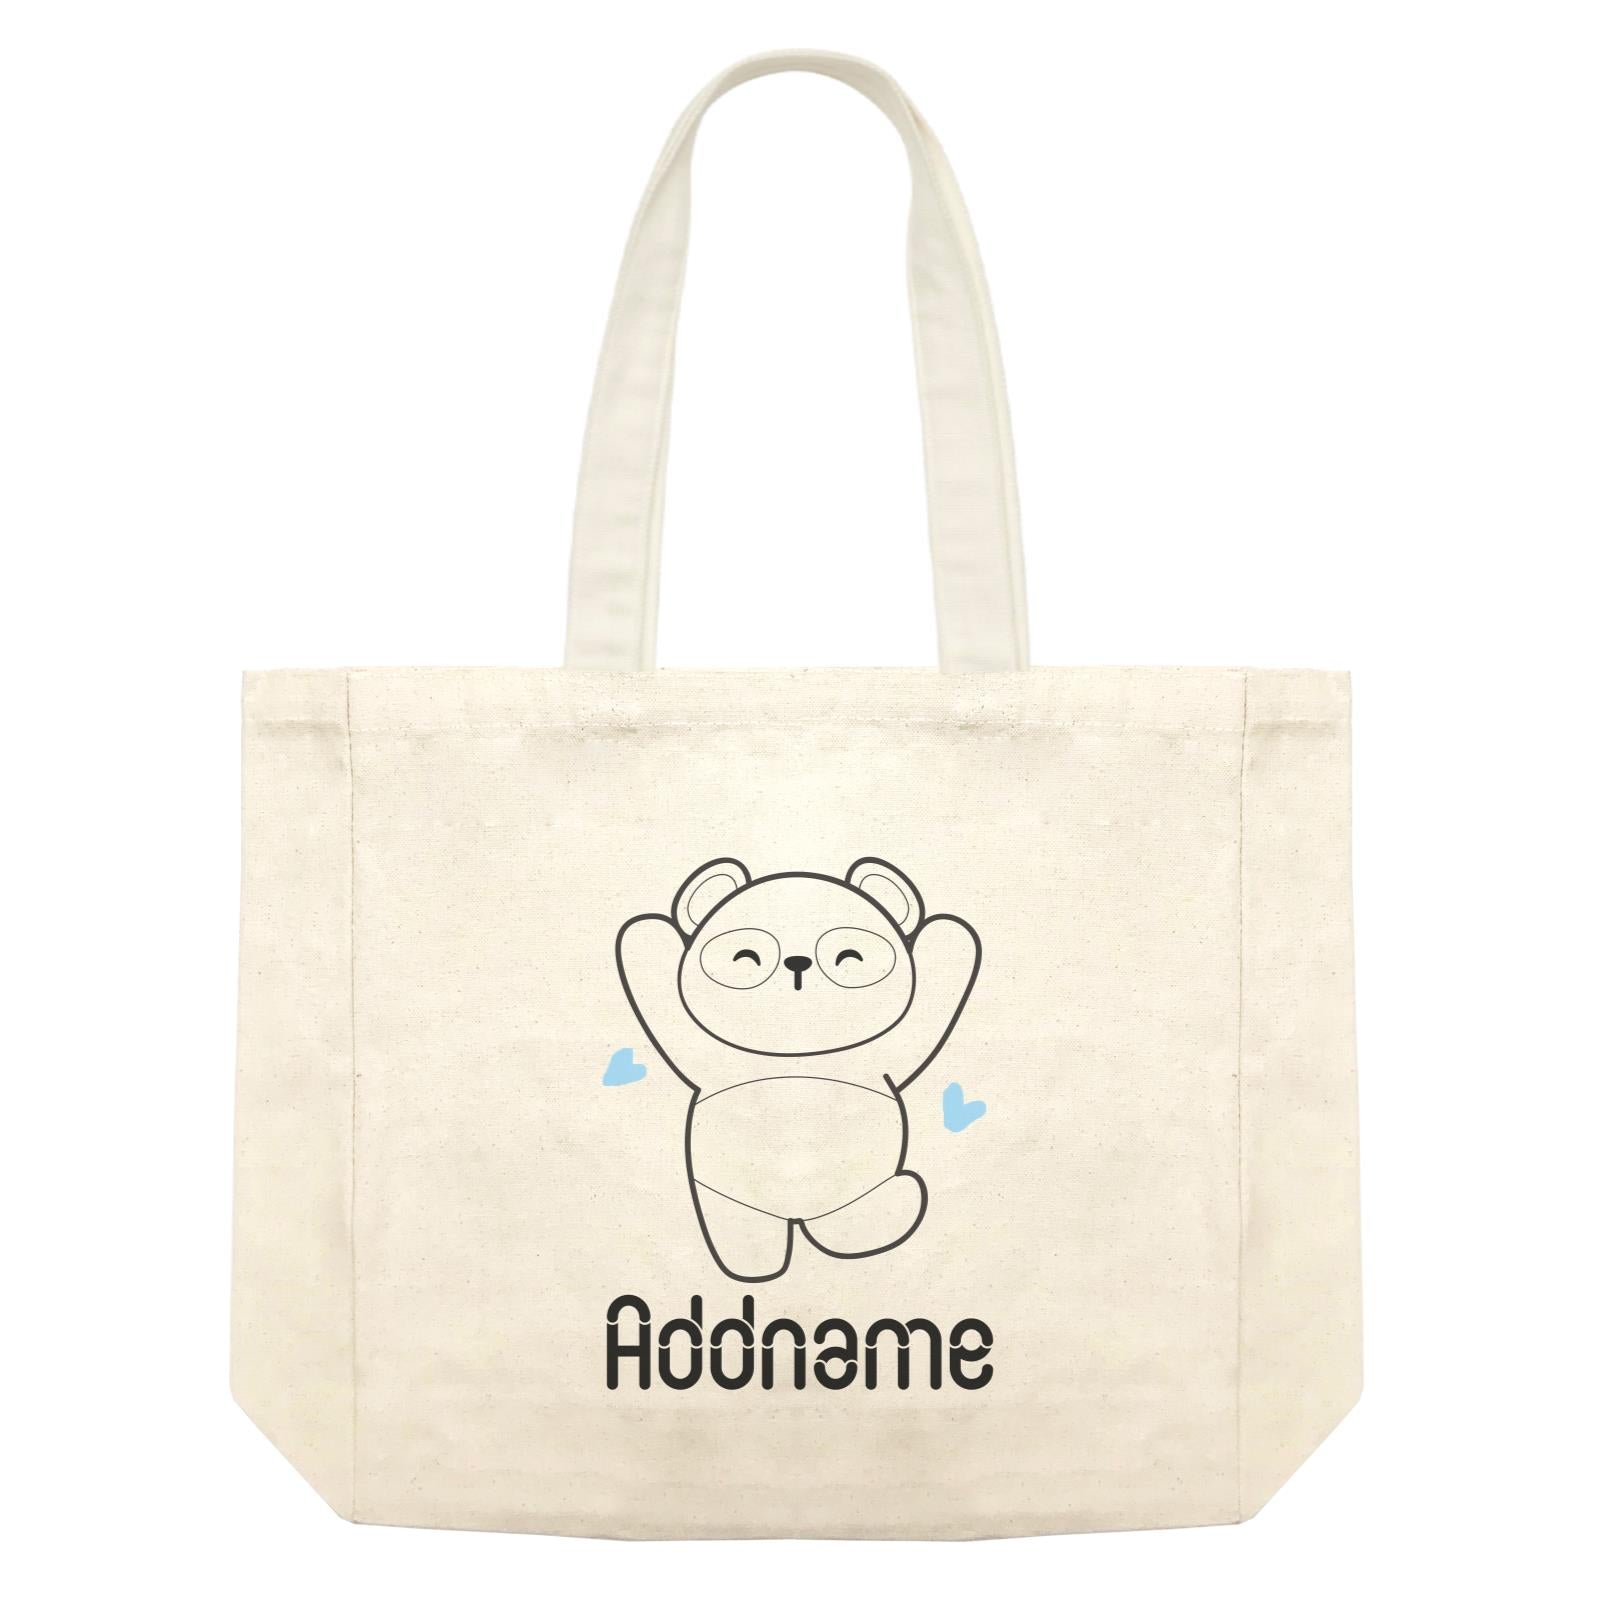 Coloring Outline Cute Hand Drawn Animals Cute Panda Jumps With Joy Addname Shopping Bag